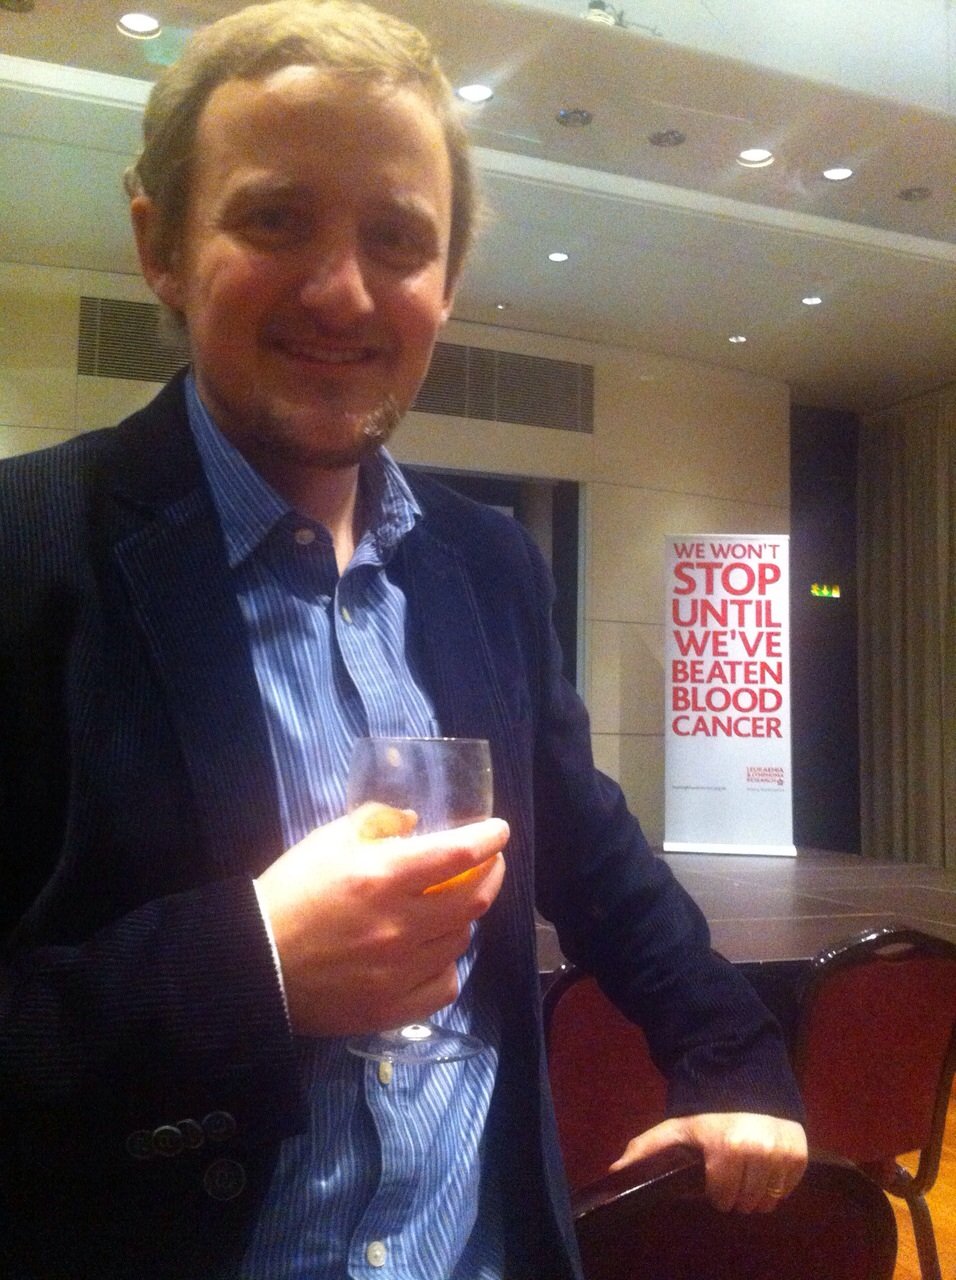 George, with LLR 'We won't stop until we've beaten blood cancer' poster in background